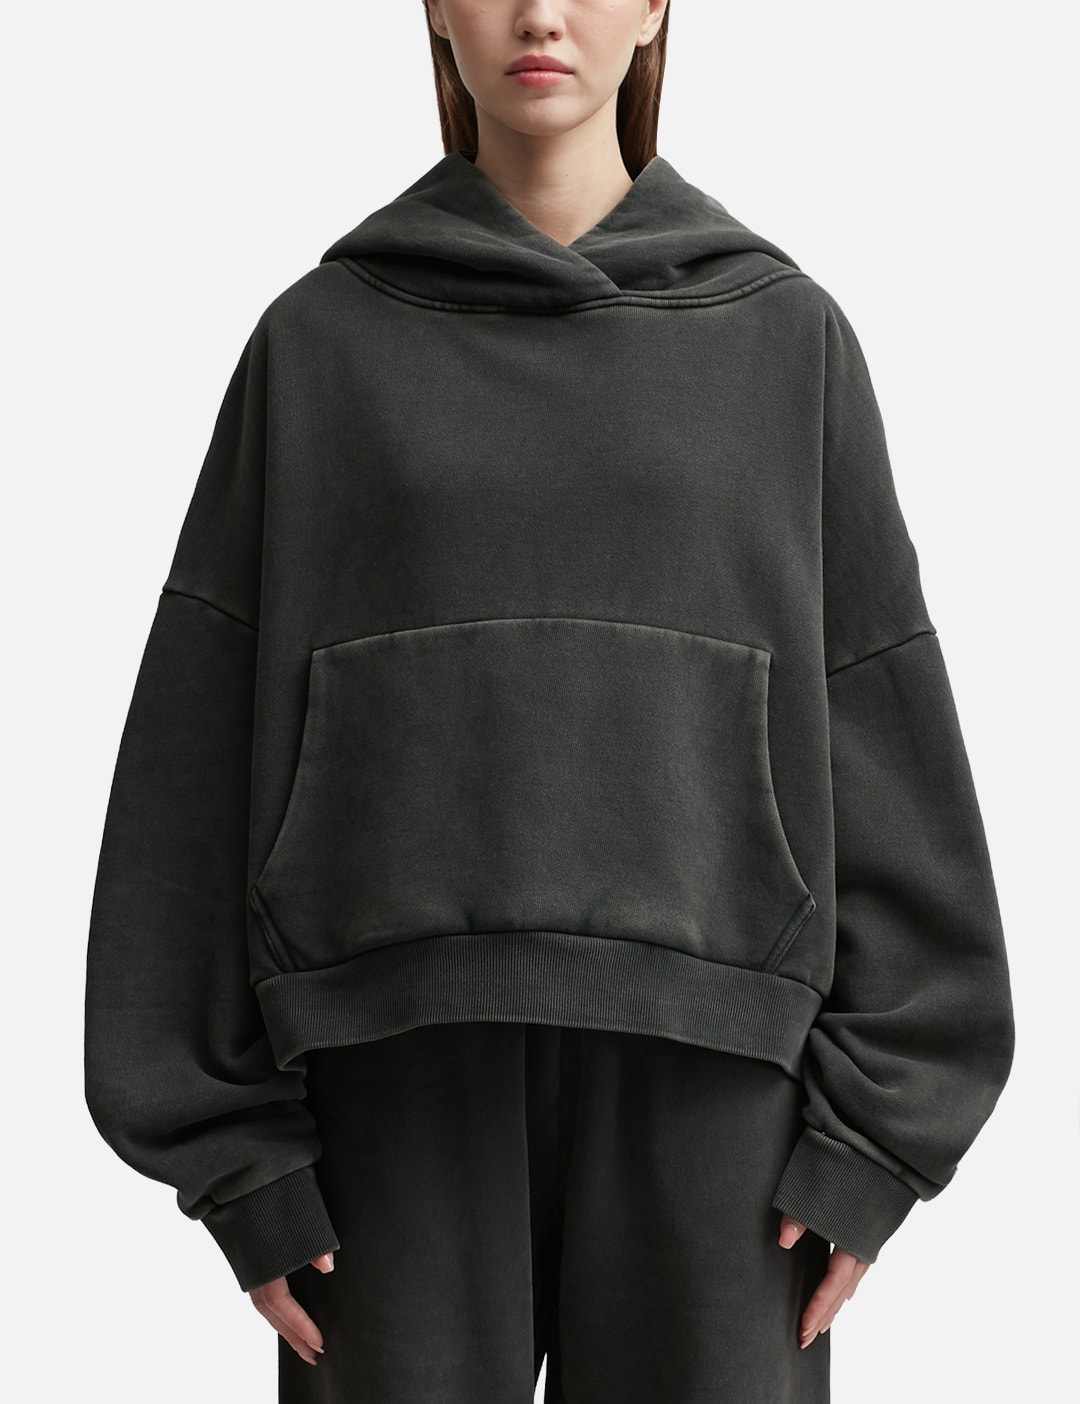 Entire Studios - Heavy Hood Hoodie | HBX - Globally Curated Fashion and ...